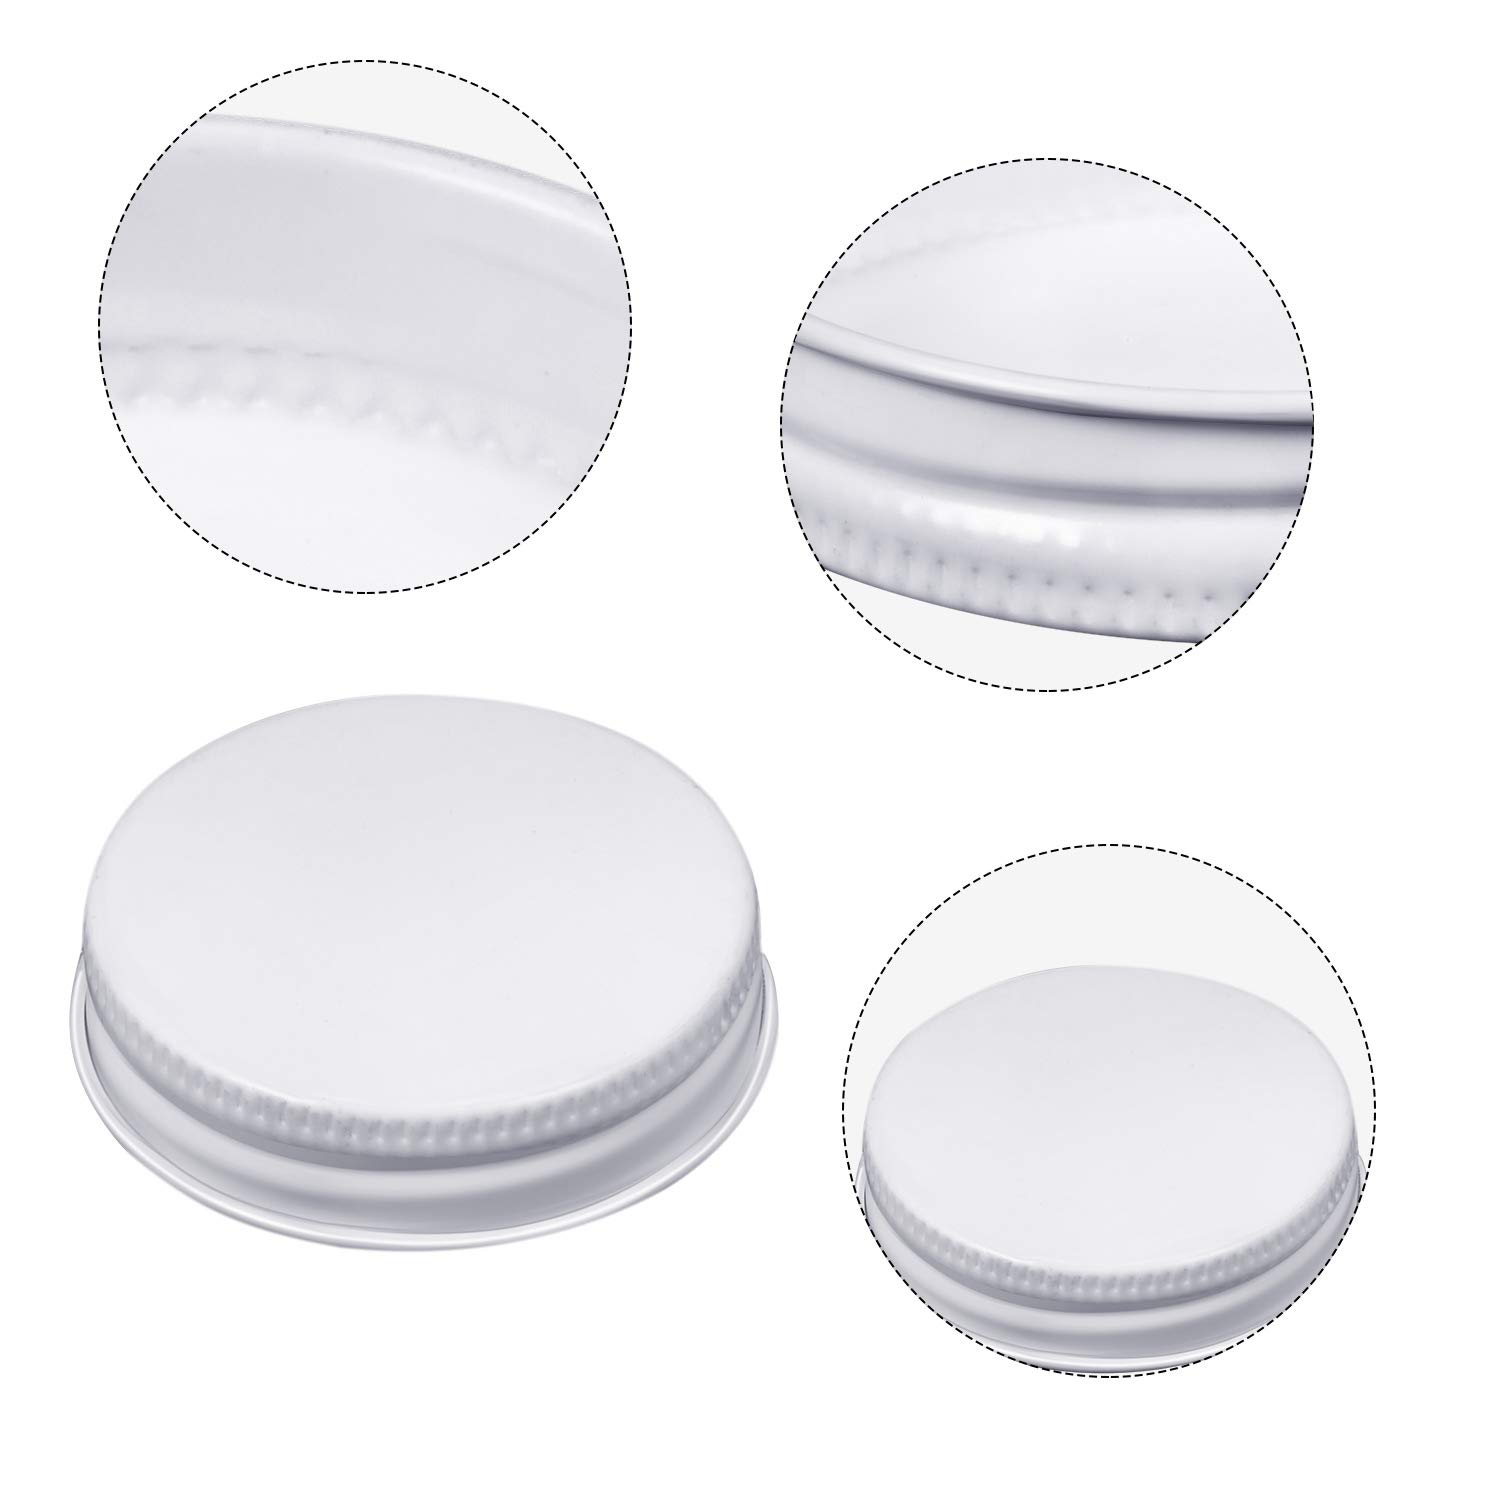 38 mm White Growler Caps Lids, Seal Screw Caps Lid,Tinplate Metal Screw Caps with White Filling Glue Fits for Most 1/2 and 1 Gallon Jugs (36 Pieces)